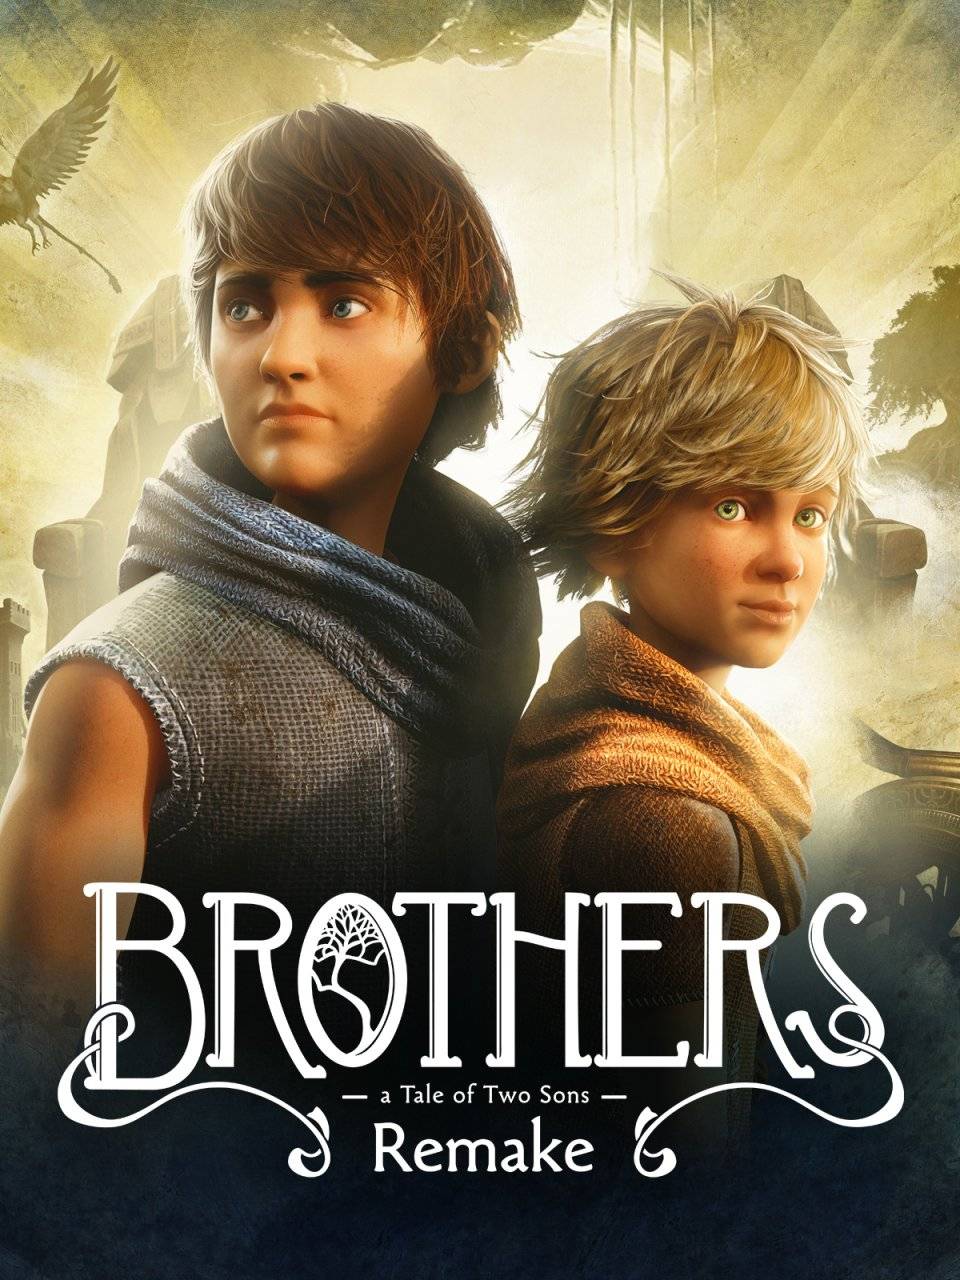 brothers-a-tale-of-two-sons-remake-c5jxn (1).jpg